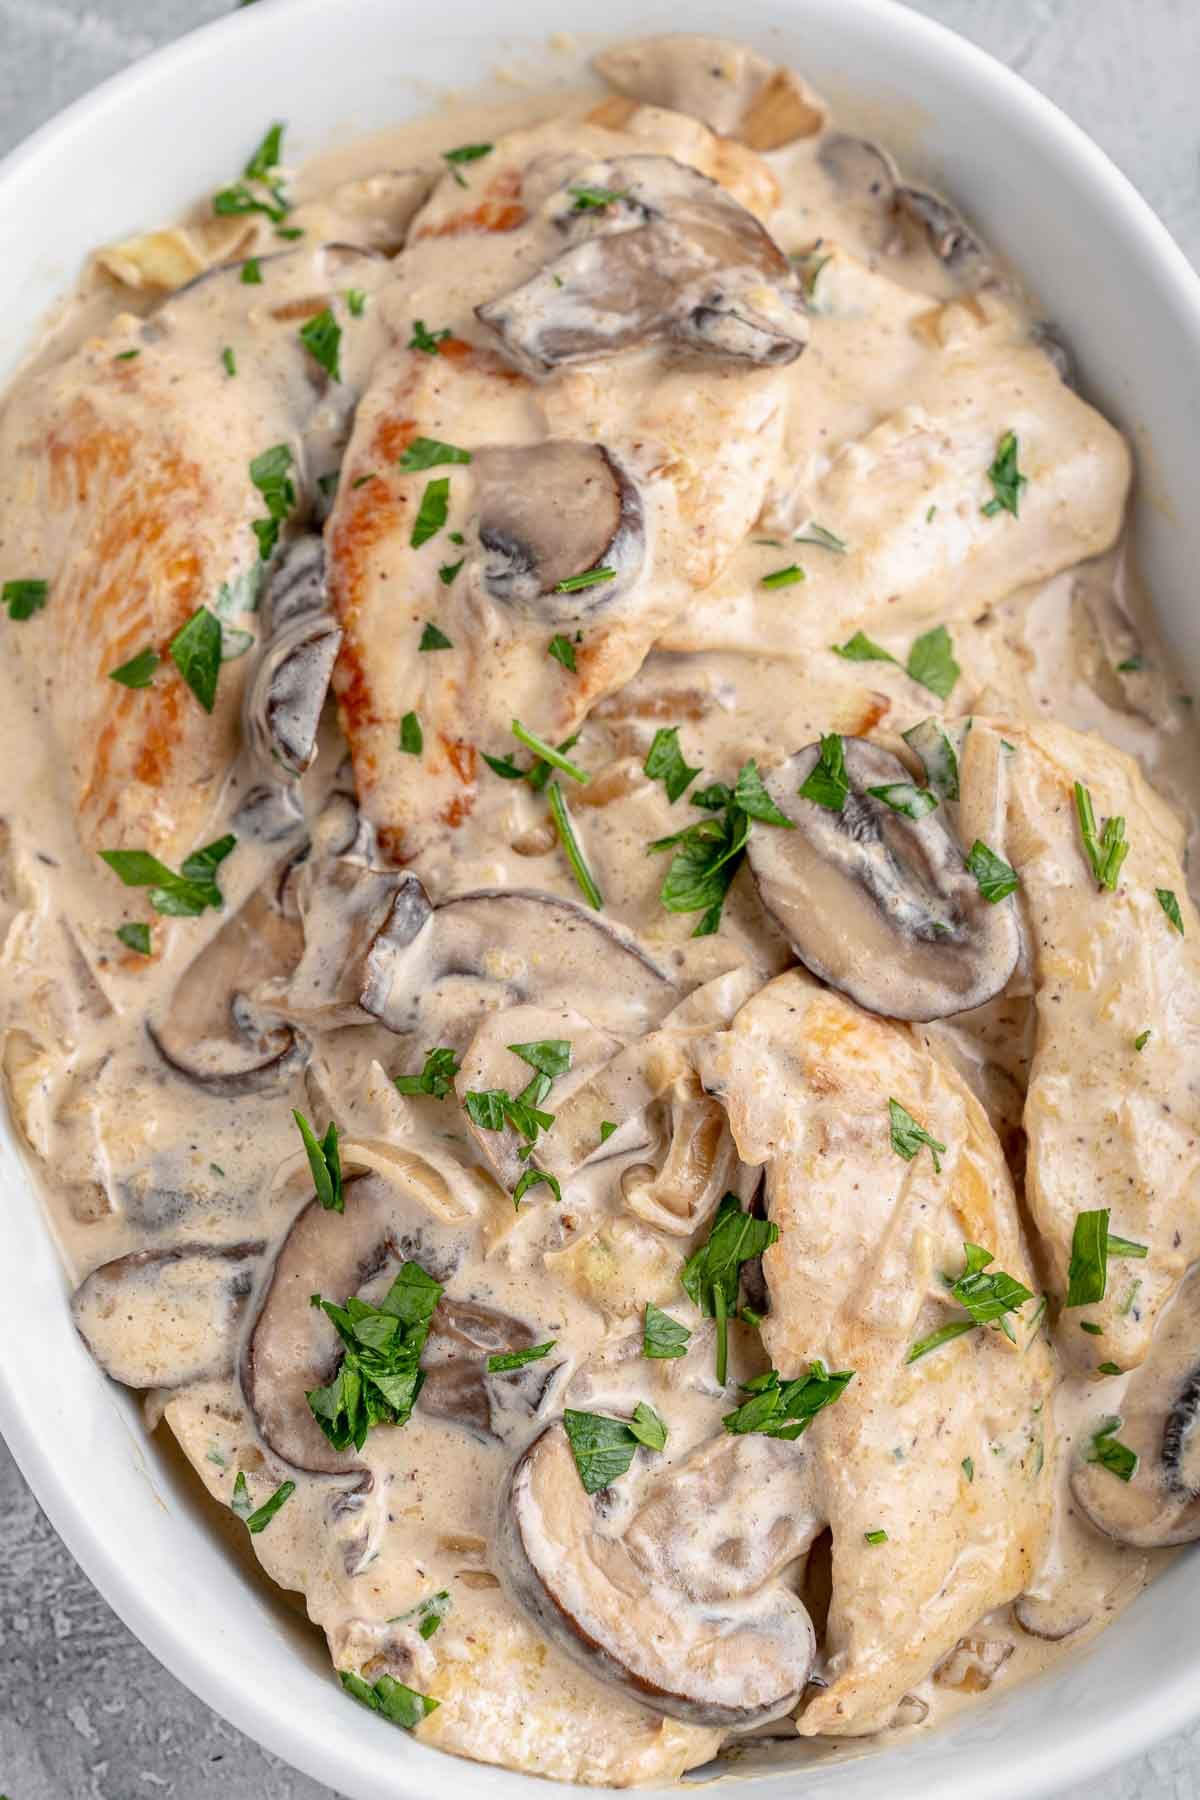 A white dish filled with chicken coated in a mushroom sauce.